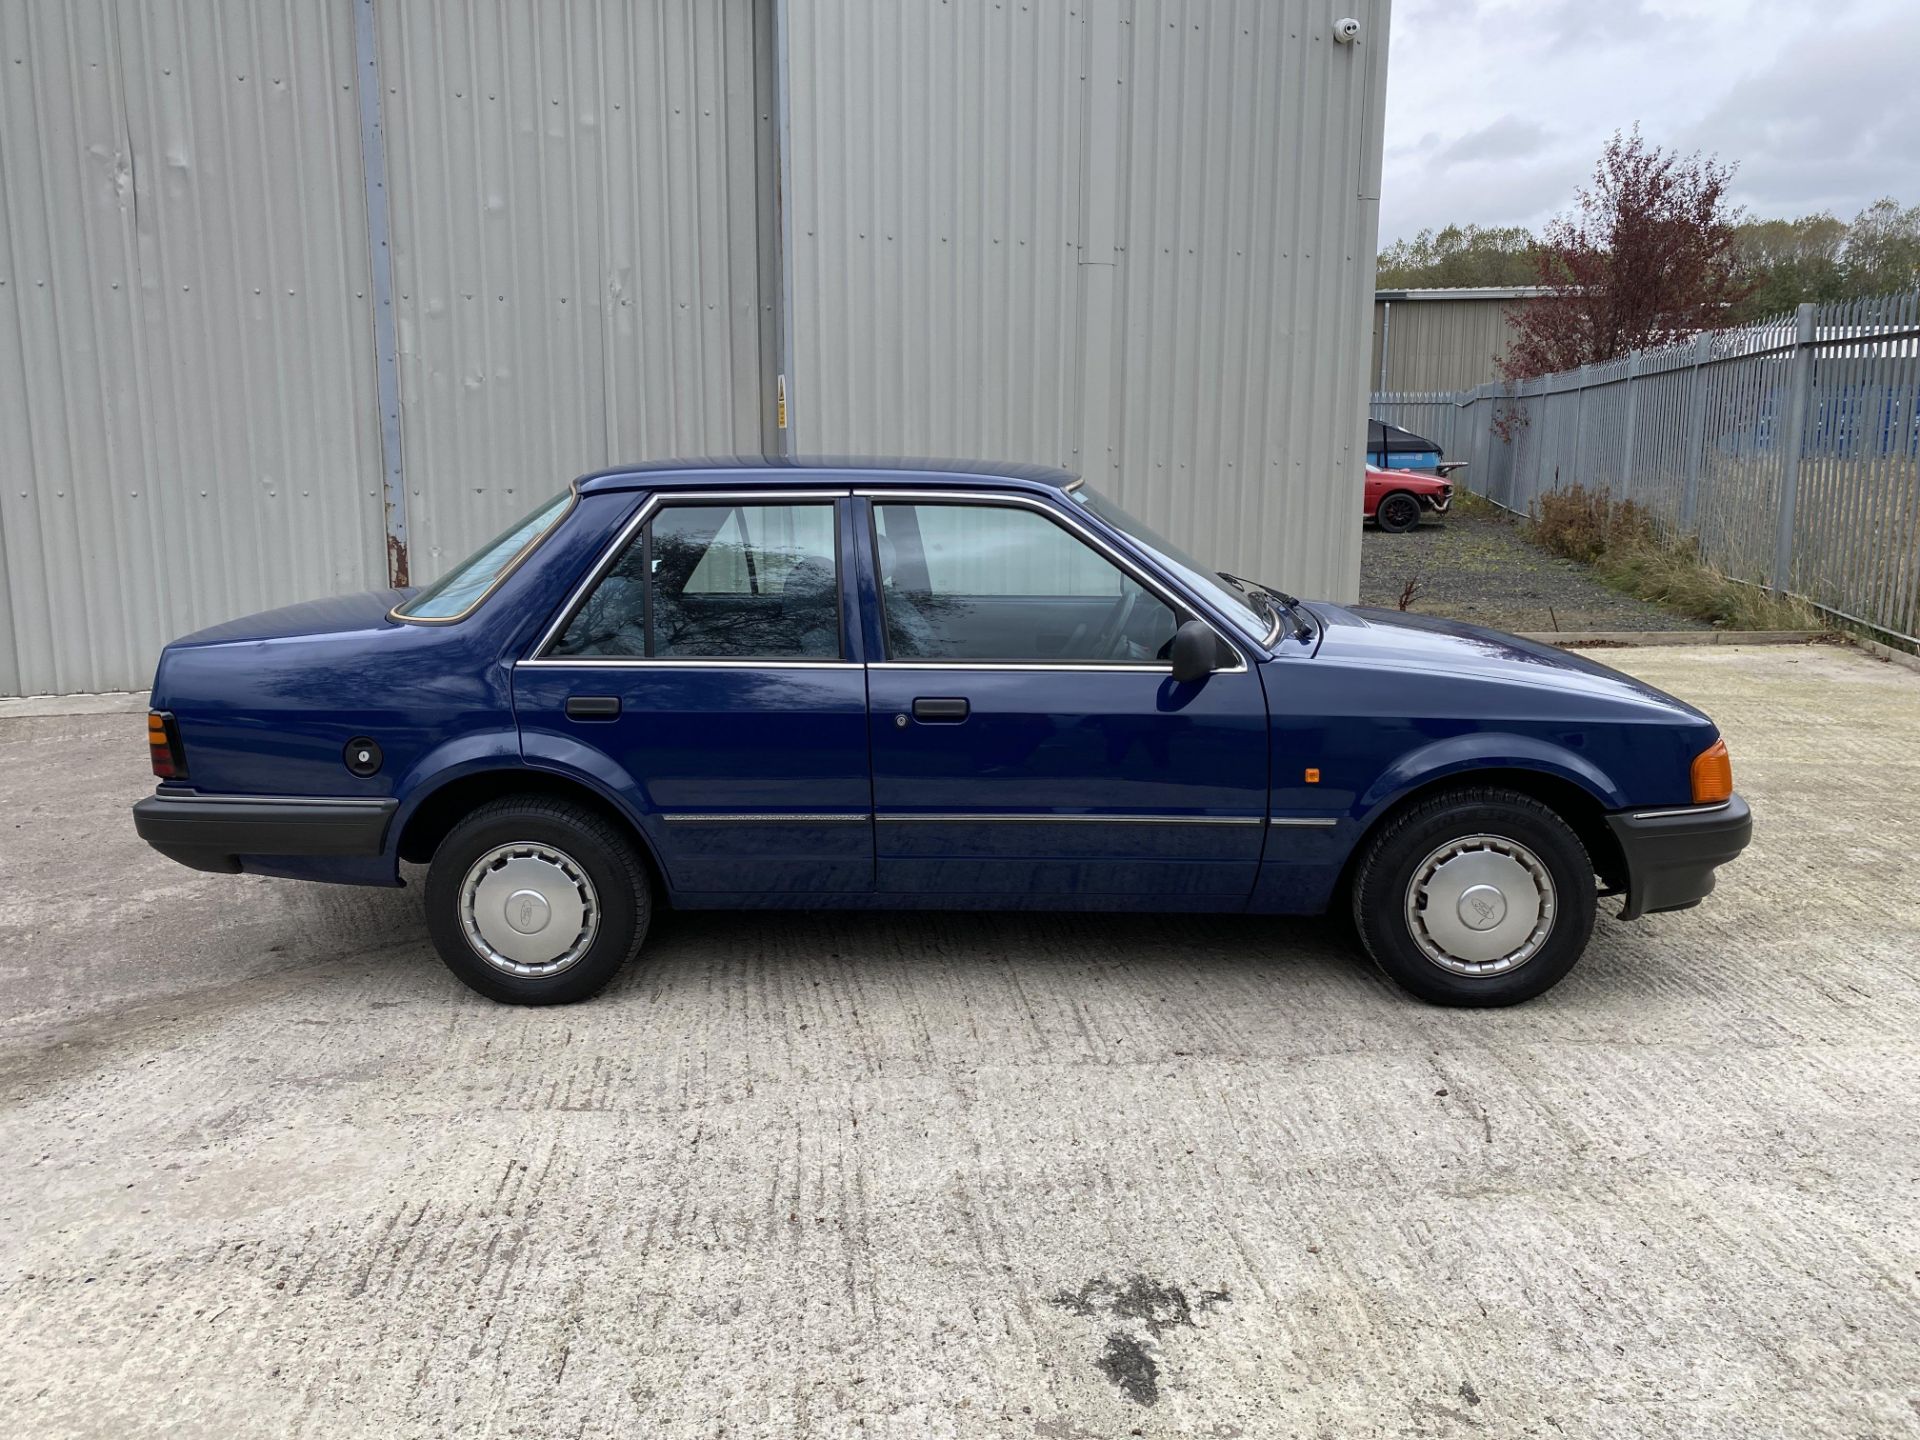 Ford Orion 1.6 GL - Image 2 of 42